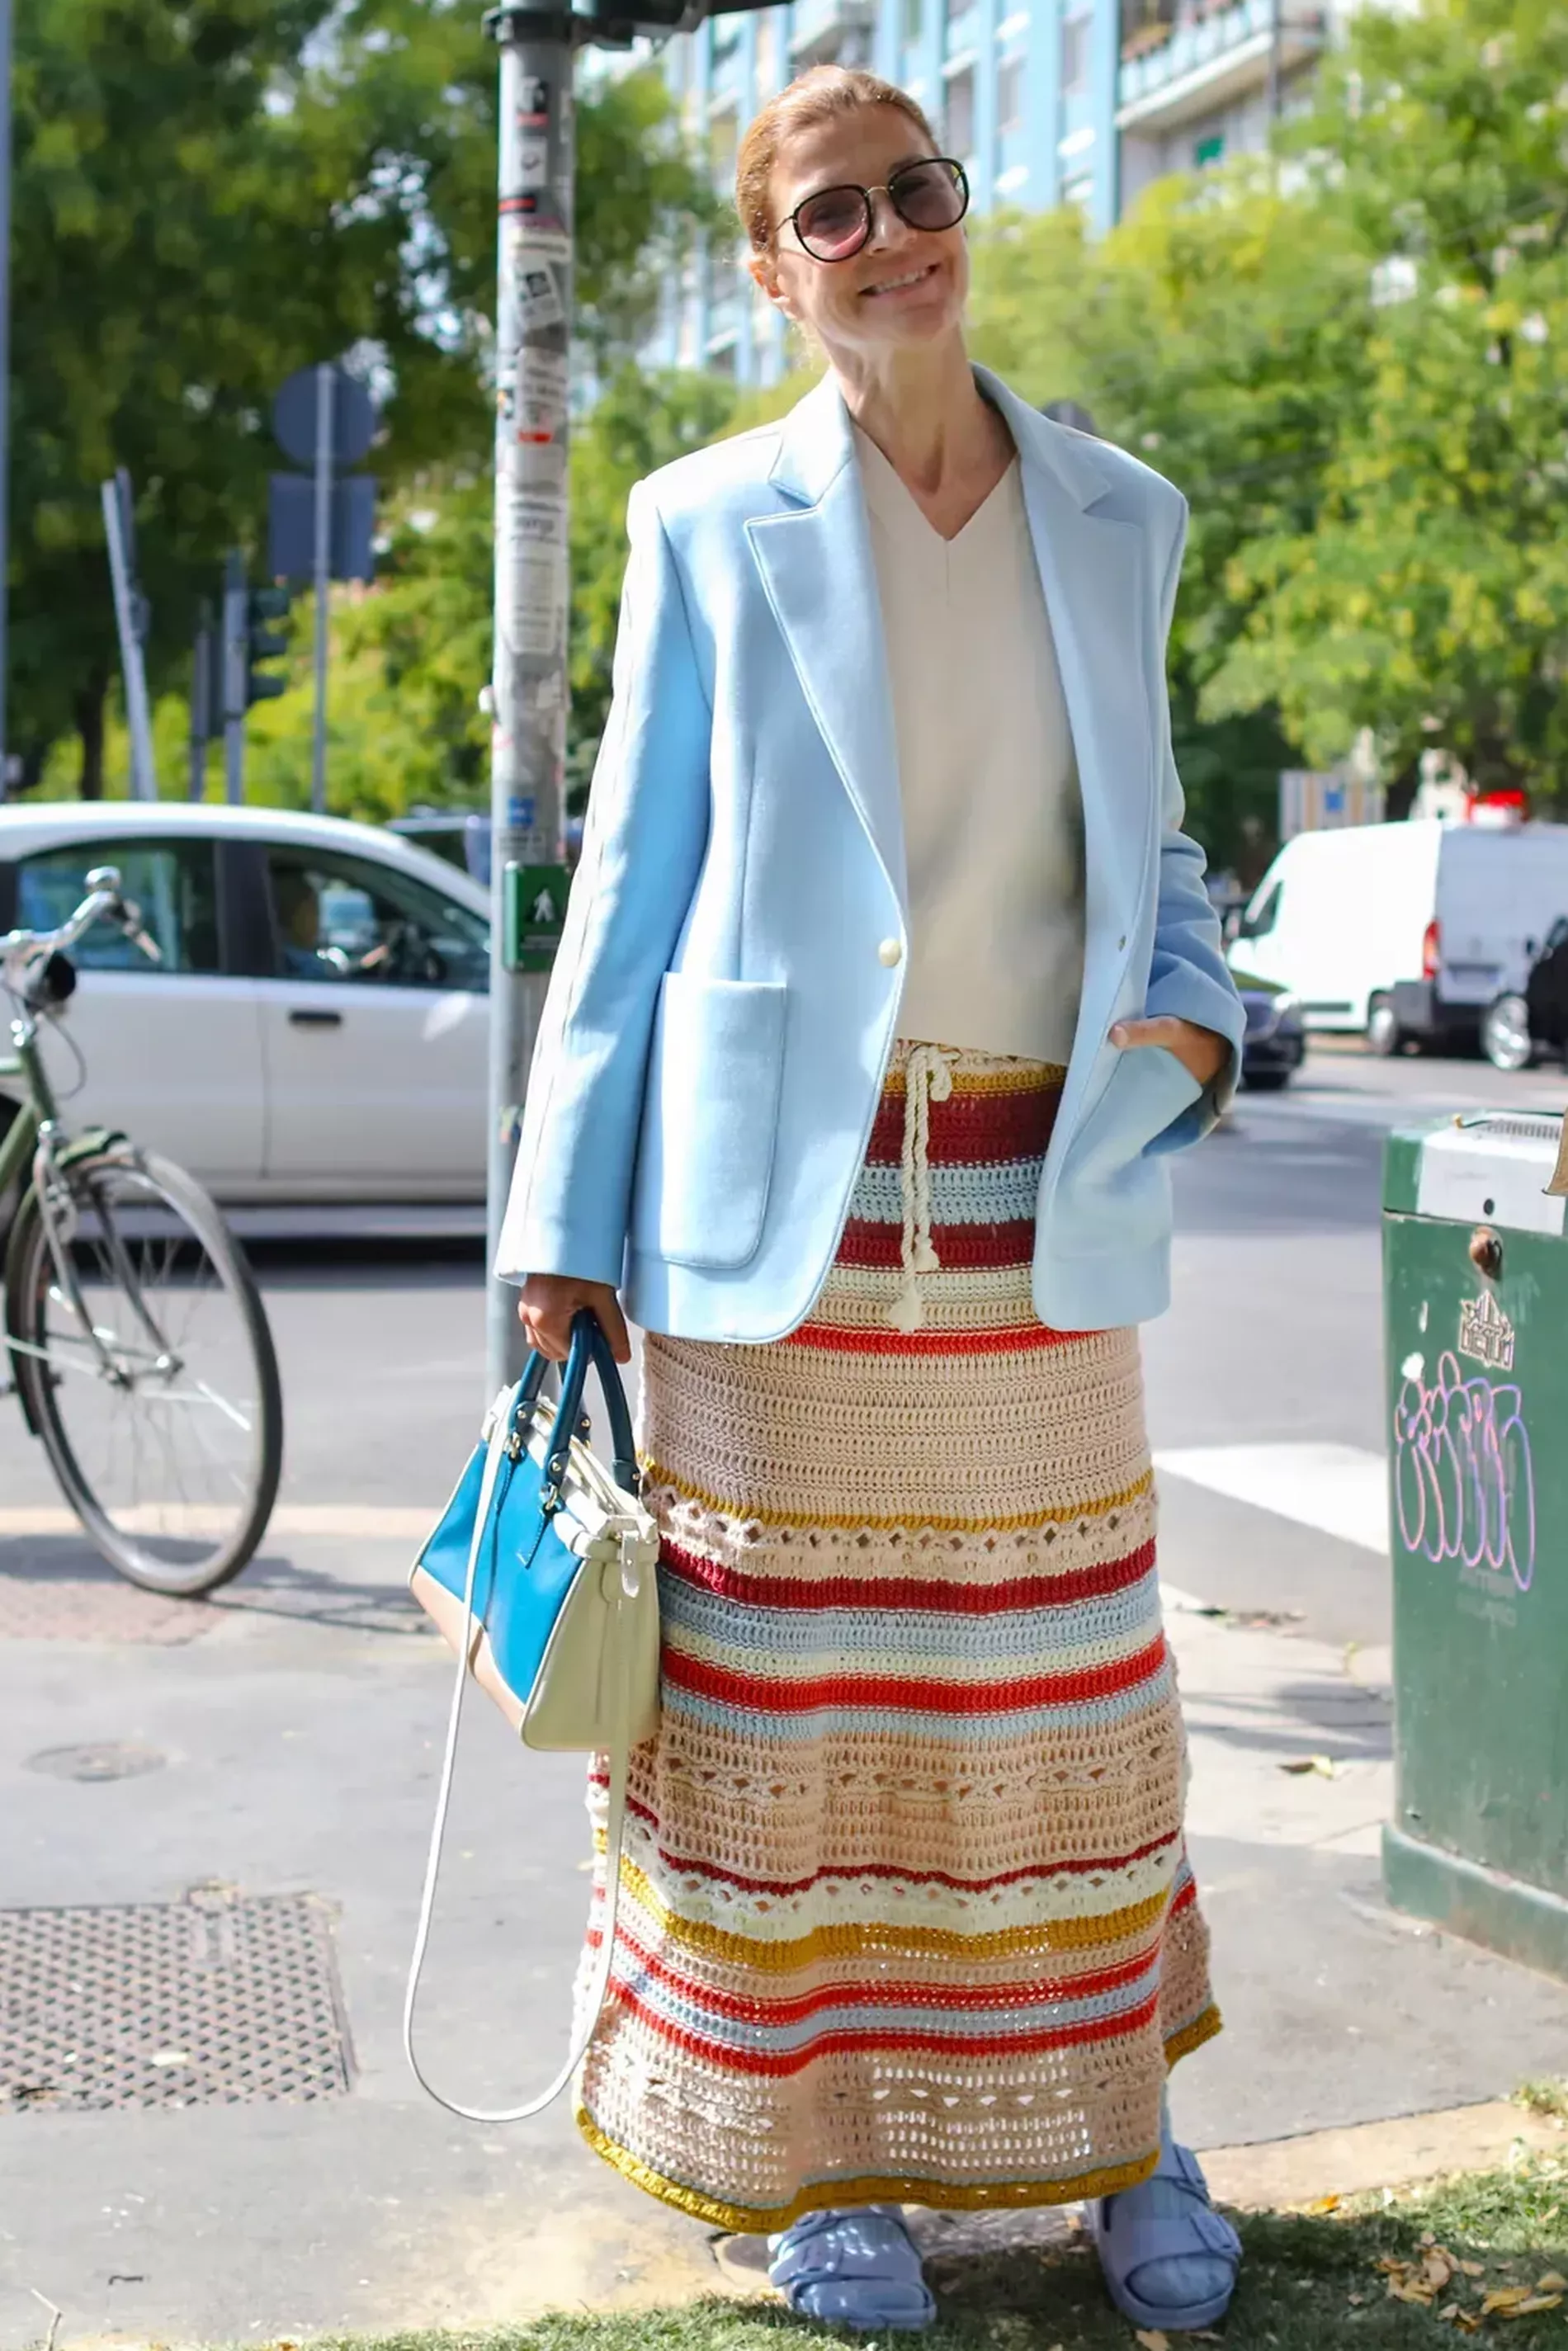 Milan fashion week guest wears striped crochet skirt with baby blue blazer and cream sweater